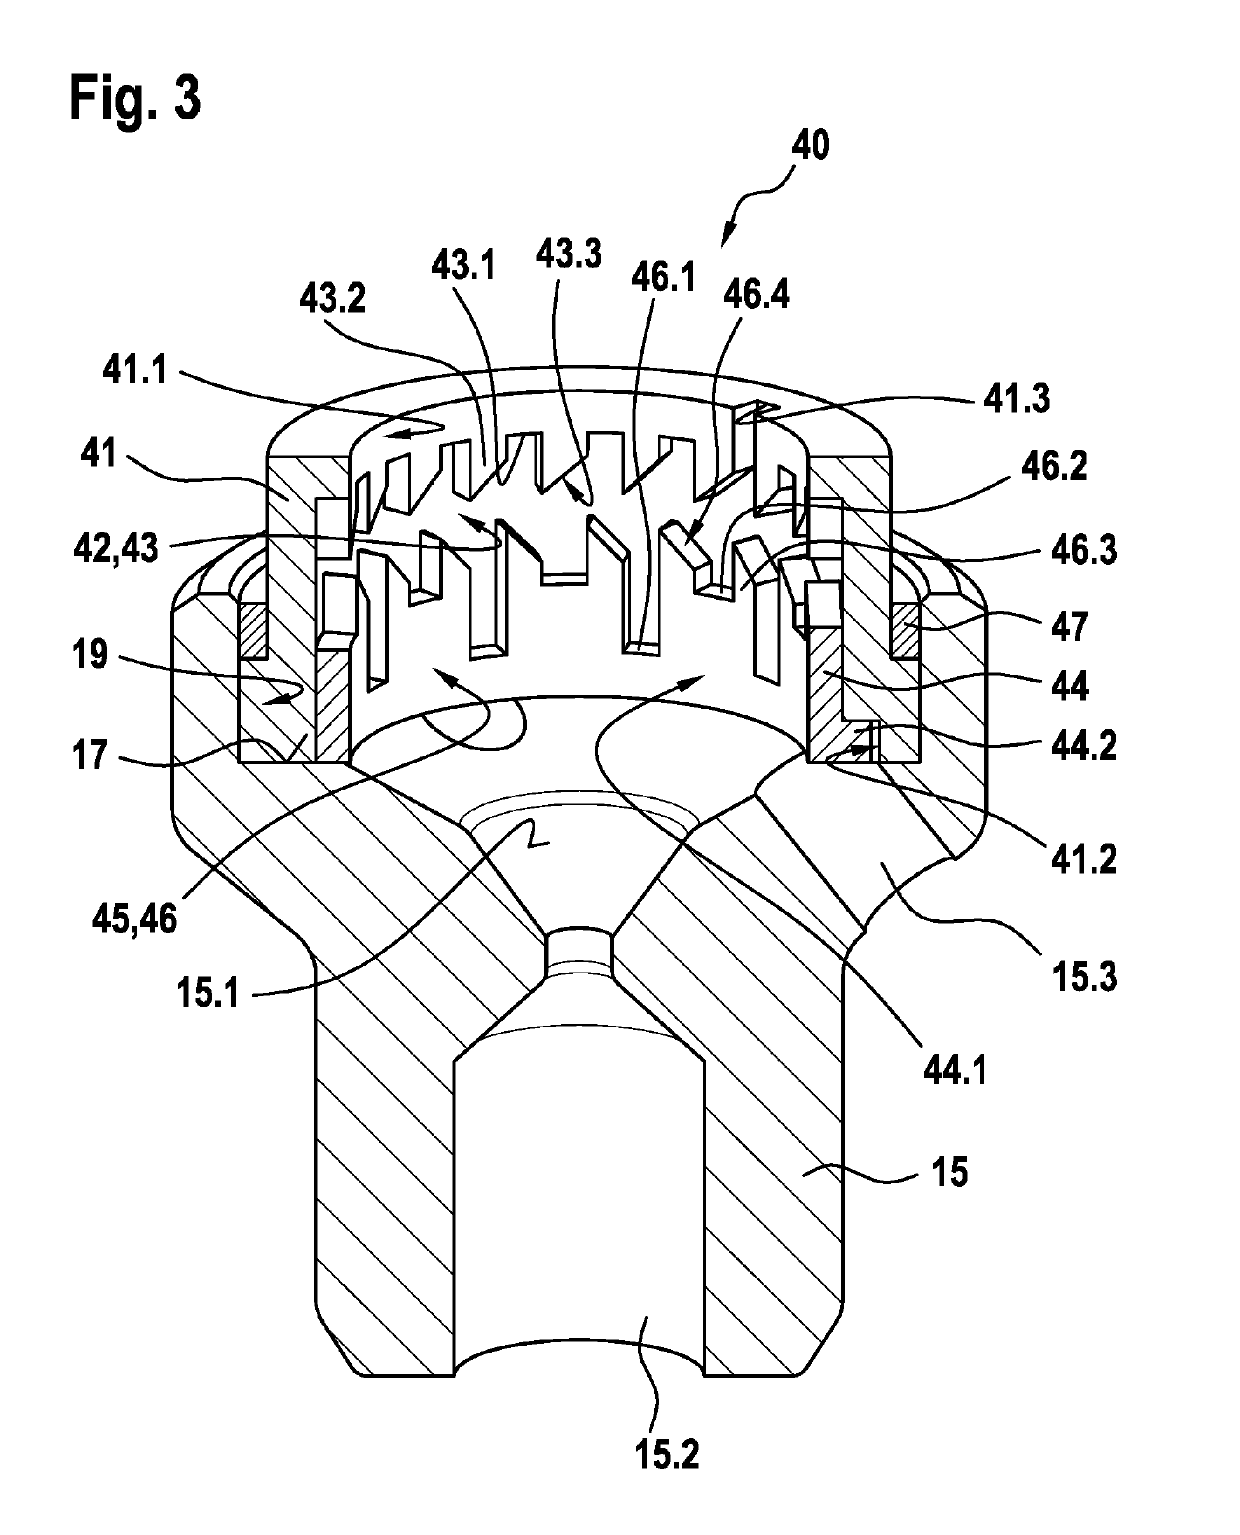 Solenoid Valve and Hydraulic Braking System for a Vehicle